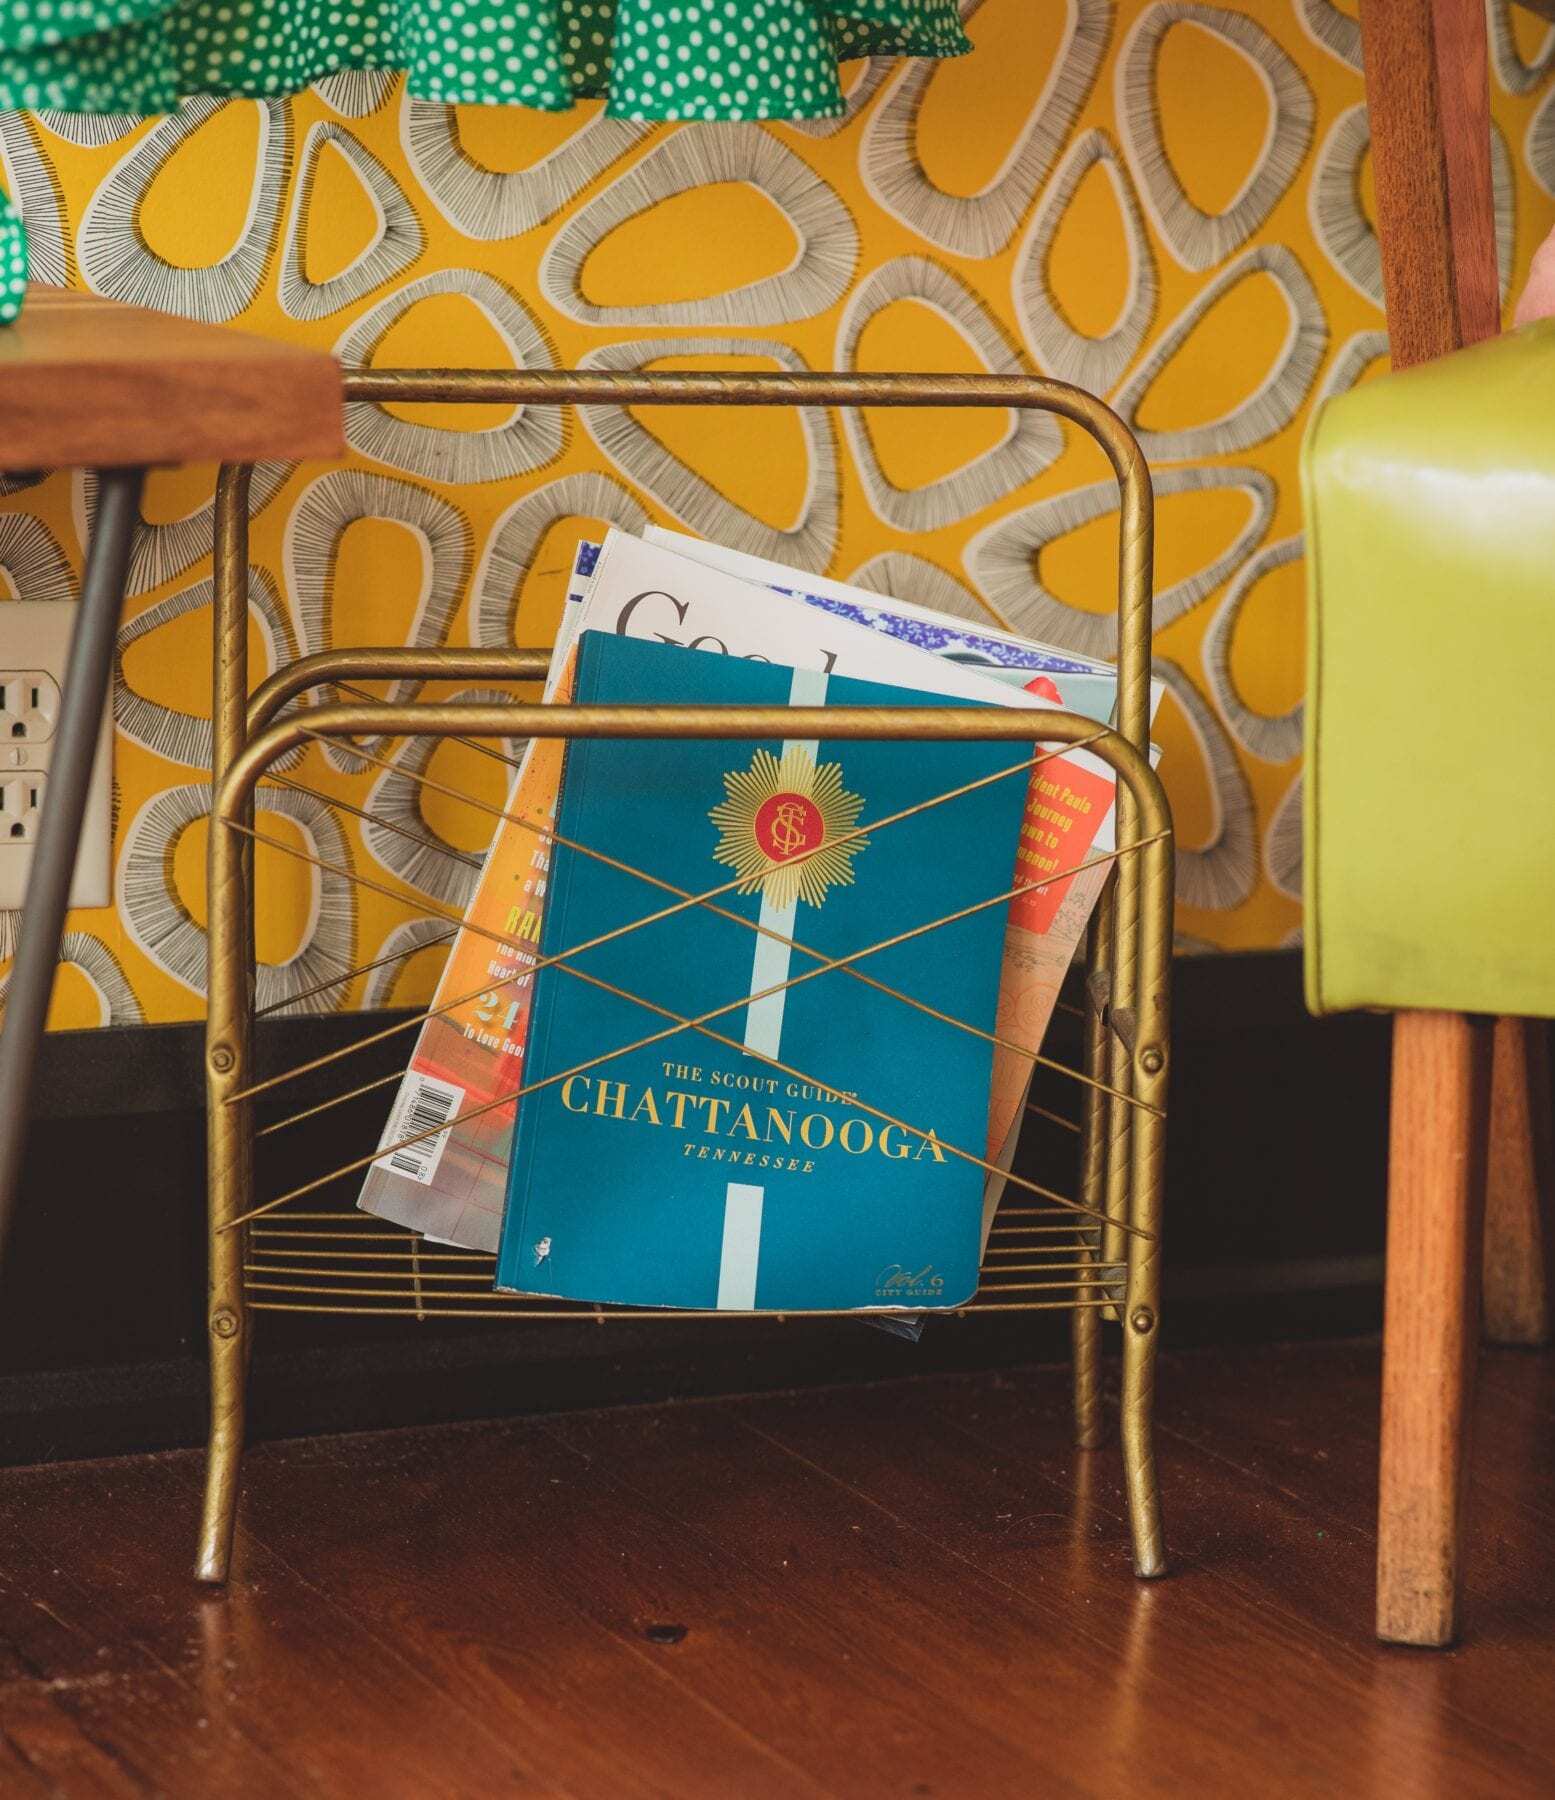 "Vintage magazine rack with a book on Chattanooga, Tennessee, in the front." Dwell Hotel Image by Beautiful Me